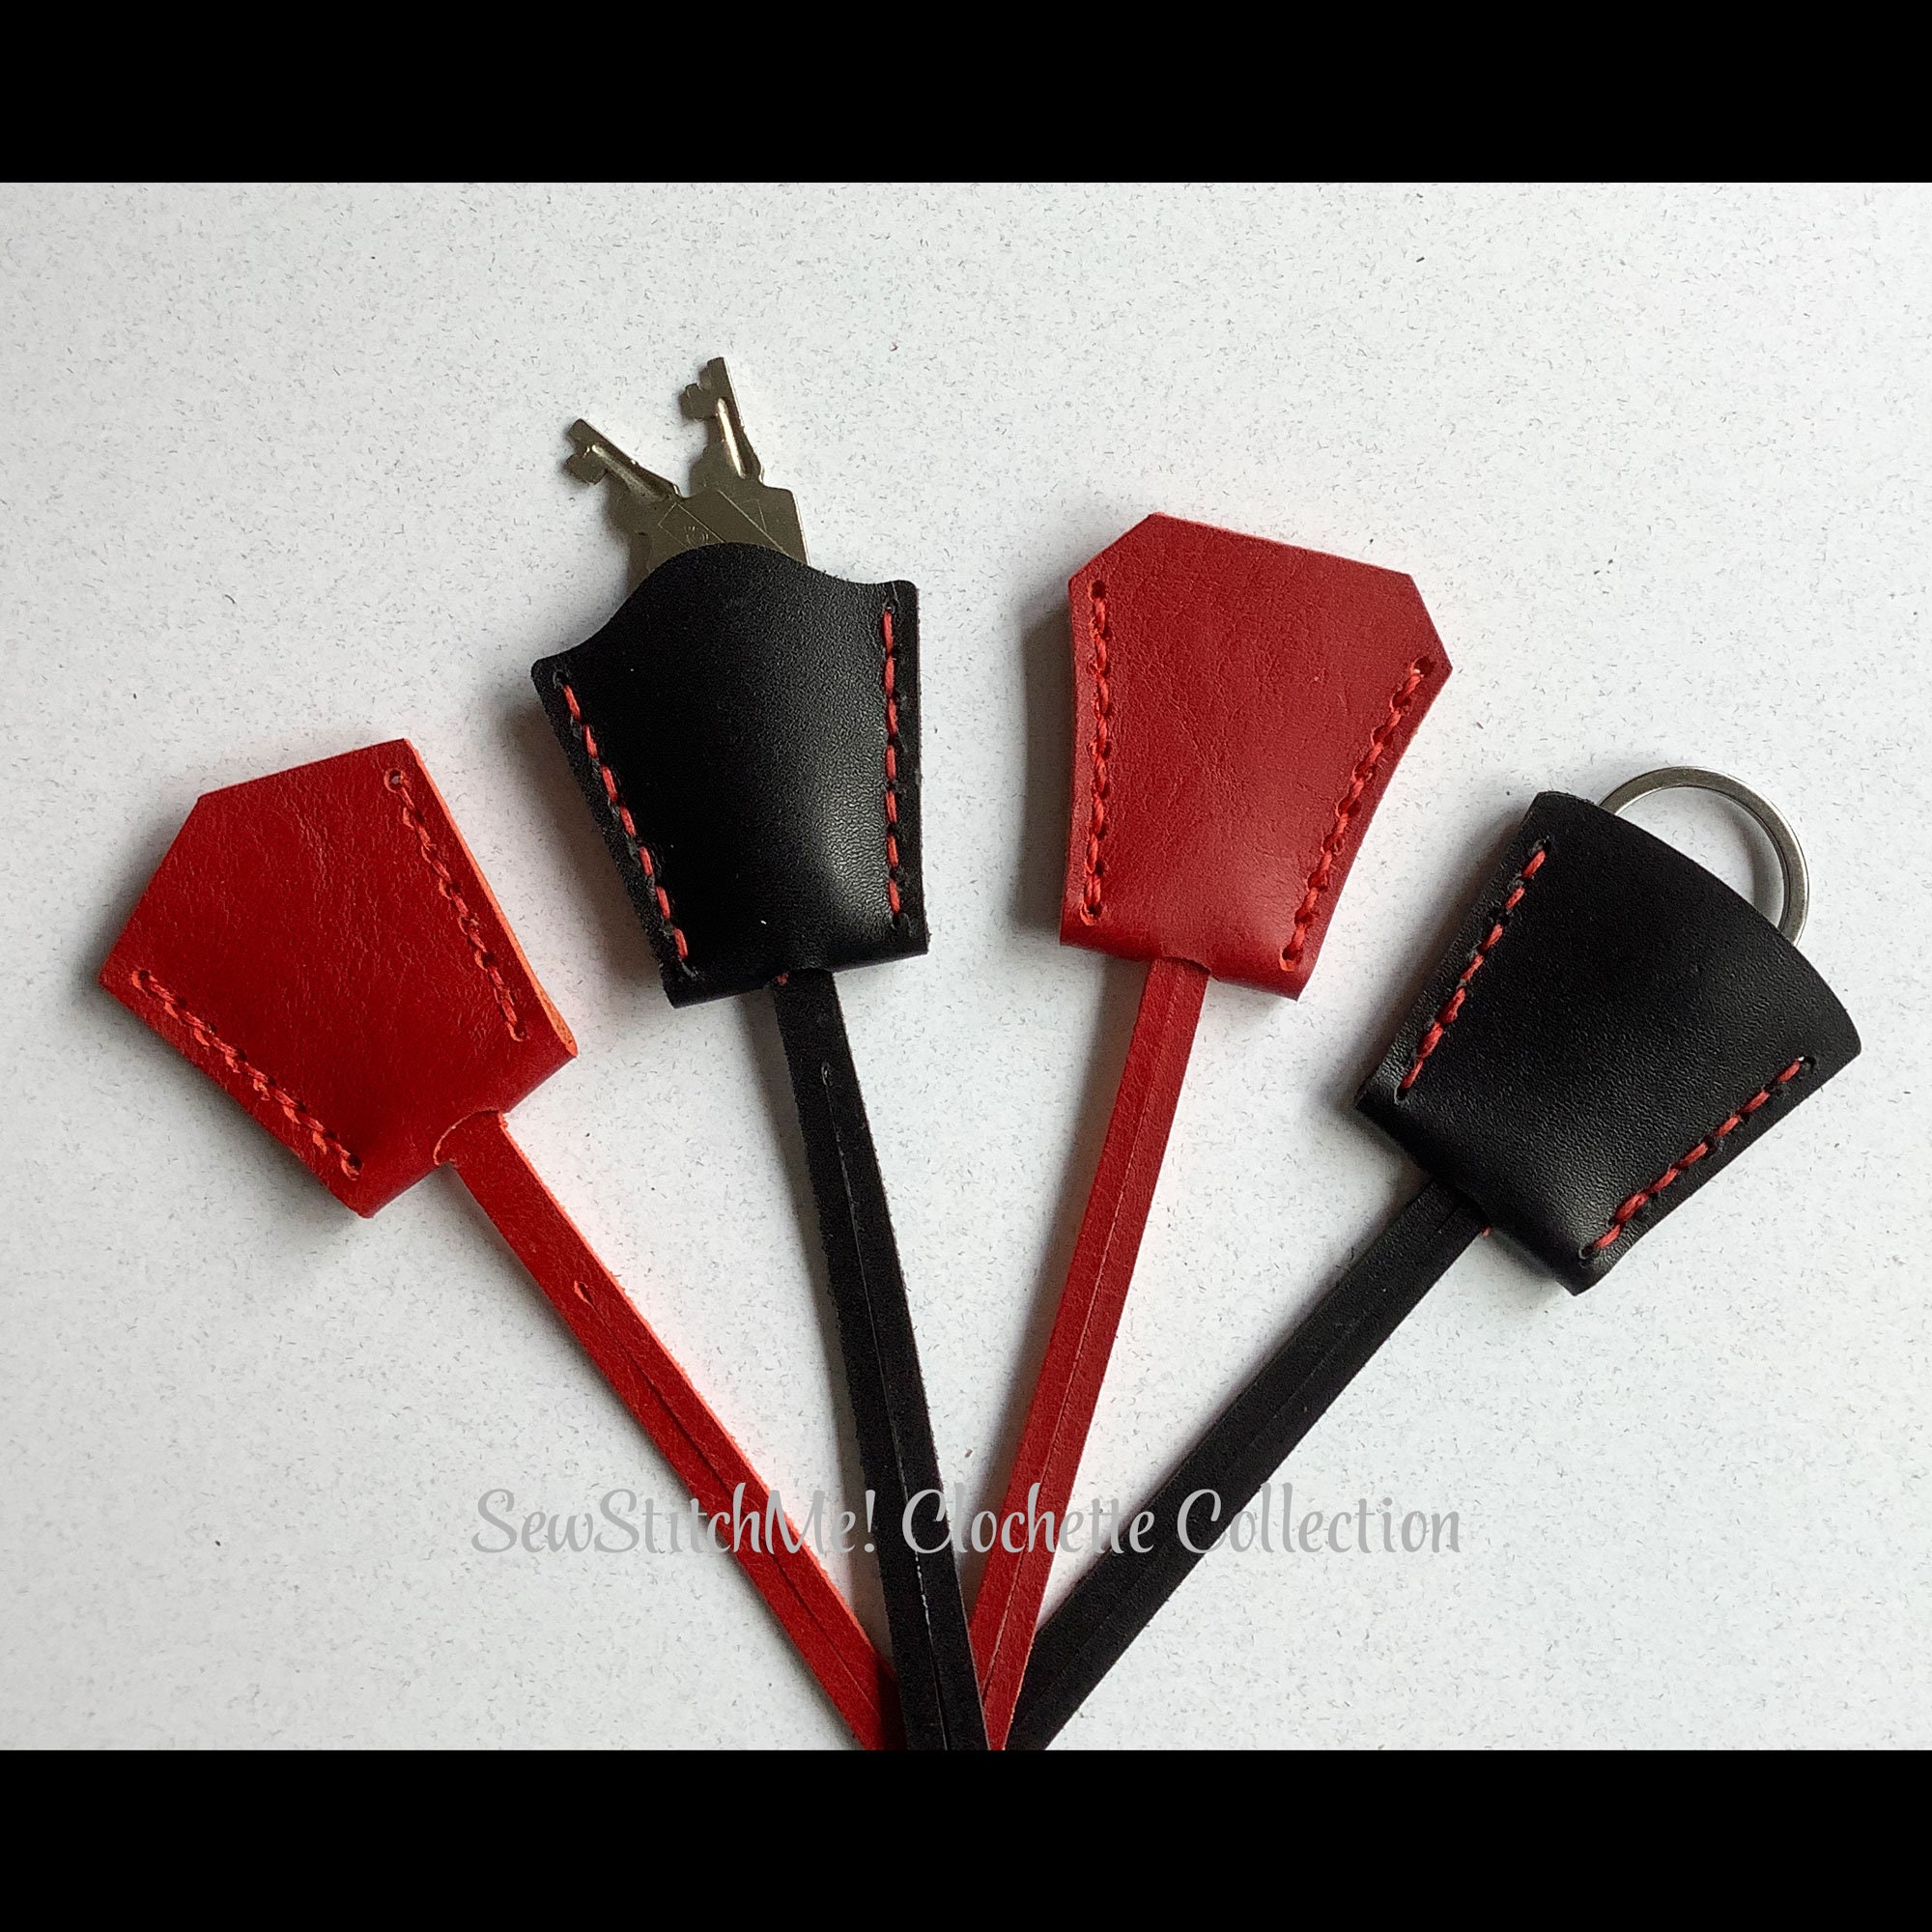 Genuine Leather Clochette Key Bell bag charm - Hotstamping available –  dressupyourpurse